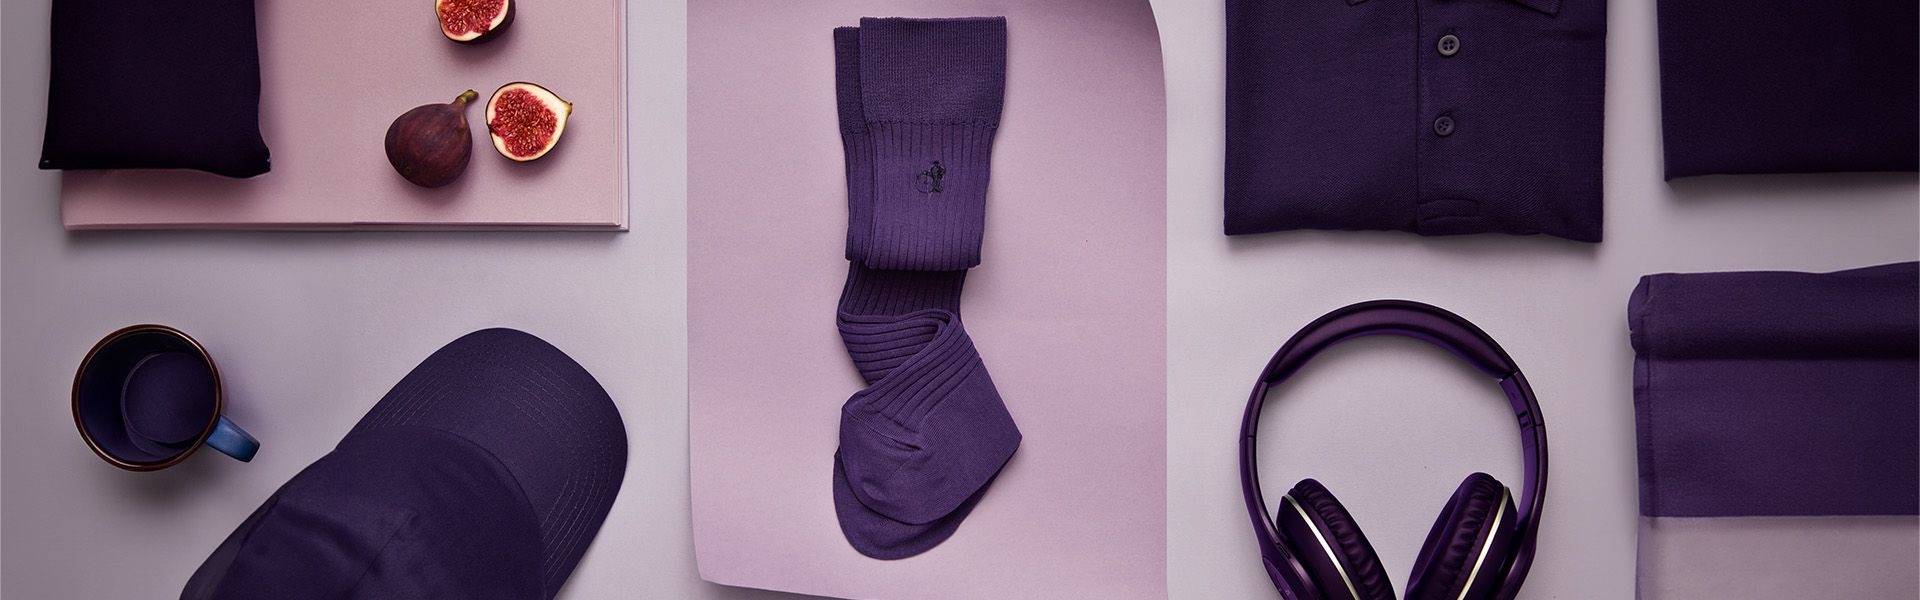 The Colour Theory Behind Purple